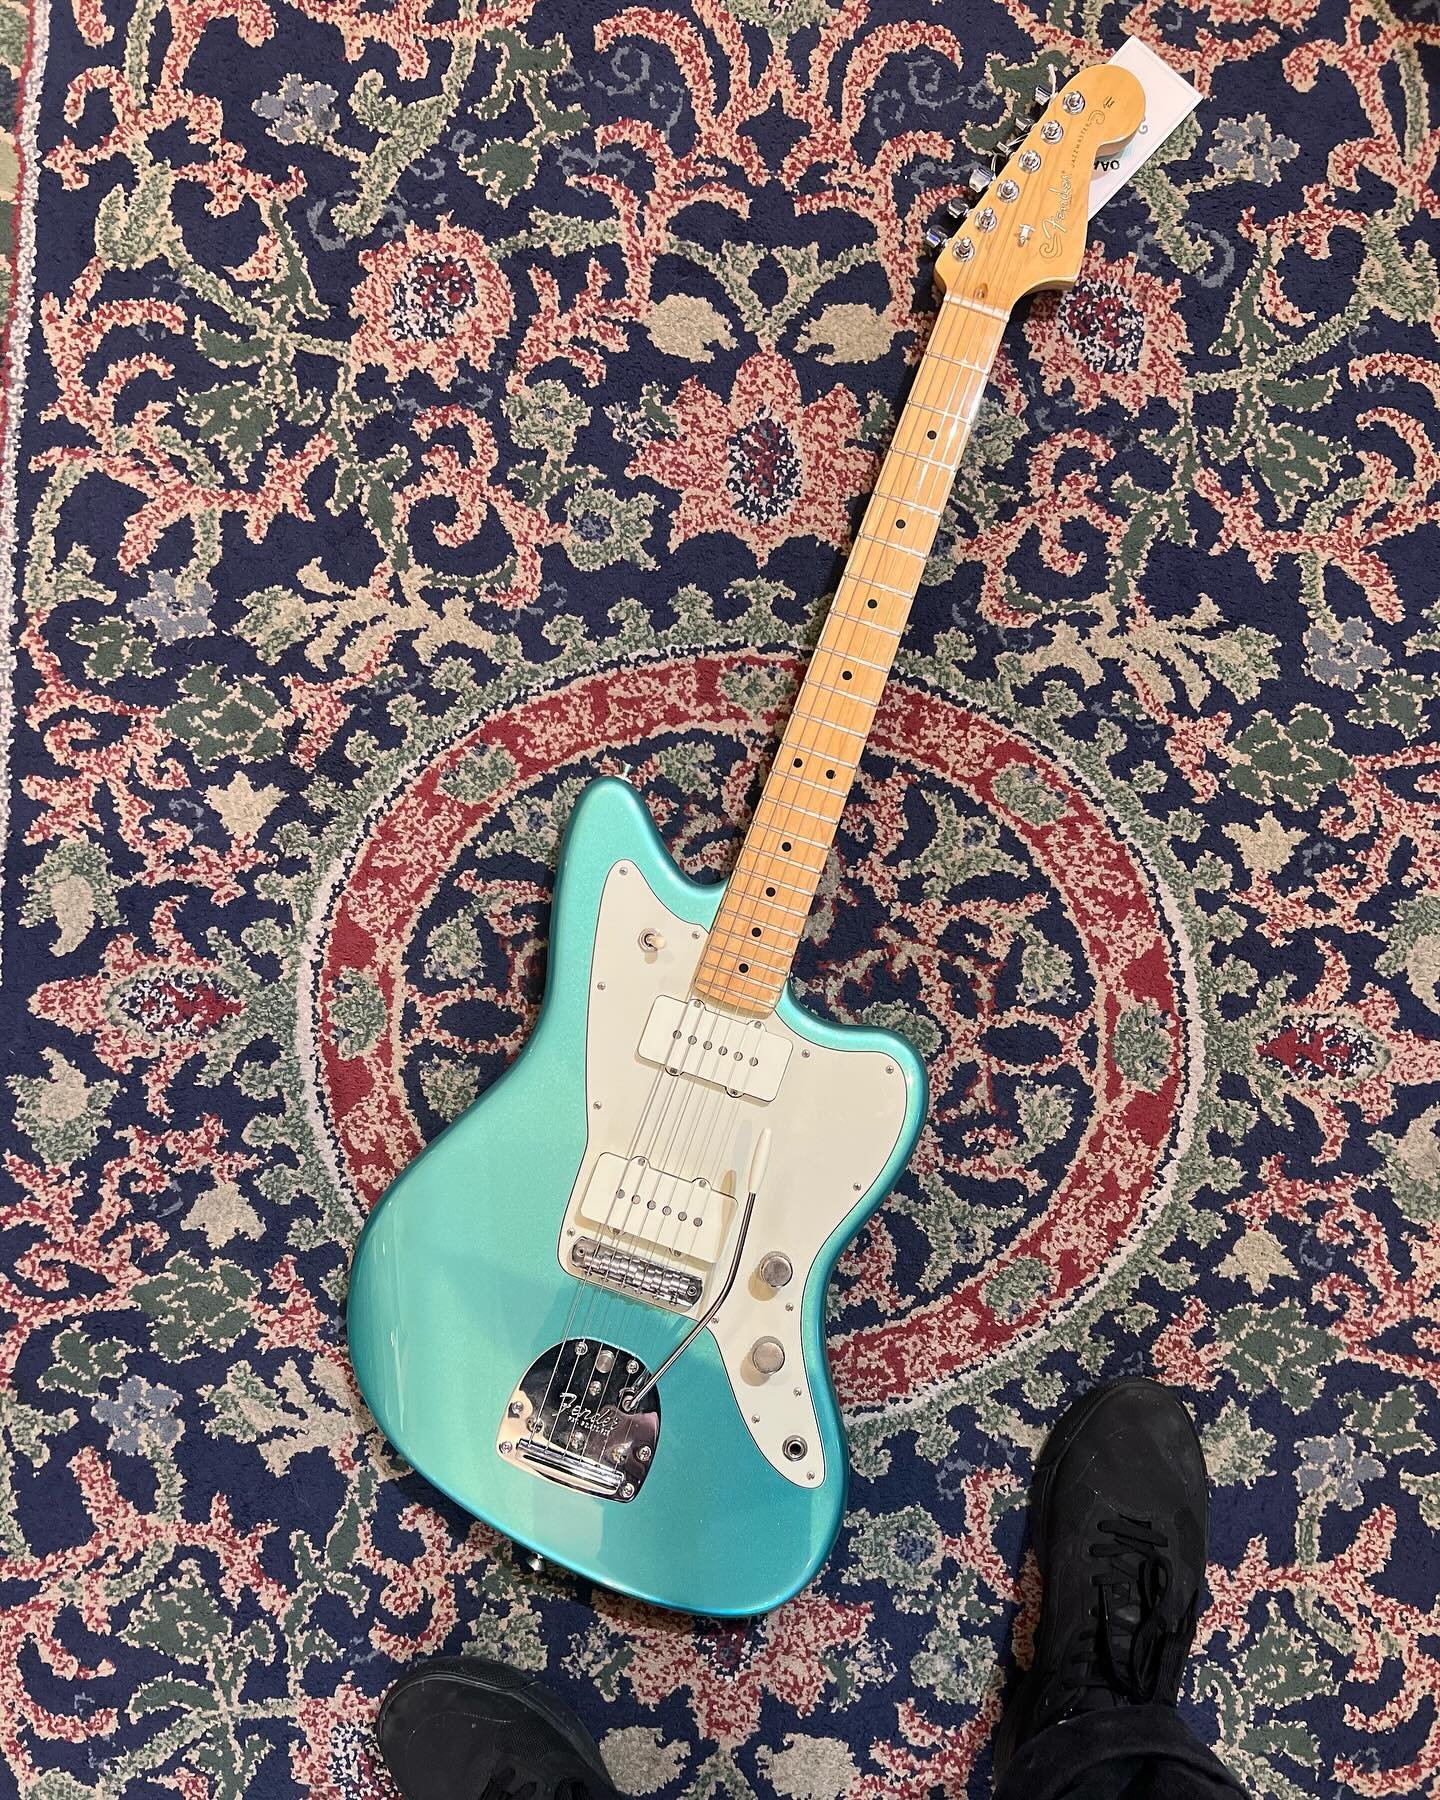 Let&rsquo;s kick this week off with a KILLER one! I love these @fender American Professional Jazzmasters! This ones is a looker and is in MINTY shape! Come with the Fender hardcase. Come play! #oaklandguitars #fender #offsetguitars #jazzmaster